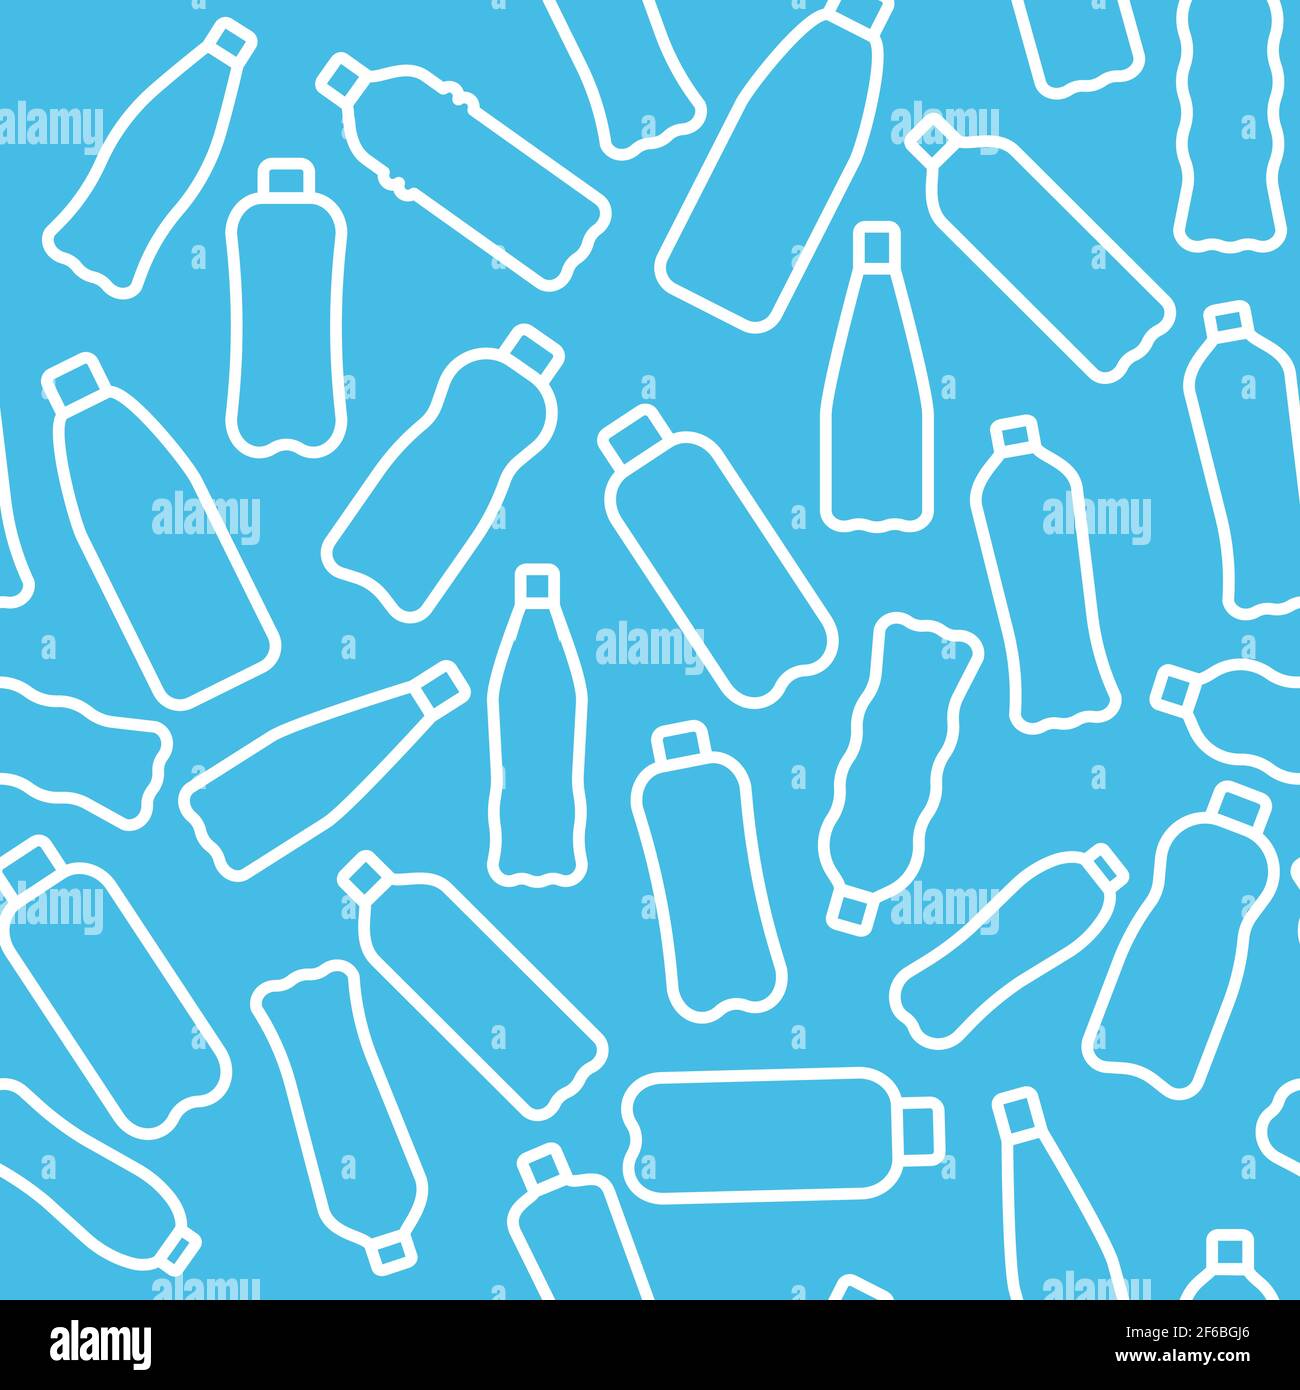 Vector illustration seamless pattern with isolated icons of plastic and glass bottles. World ocean pollution. Separate garbage collection. Stock Vector